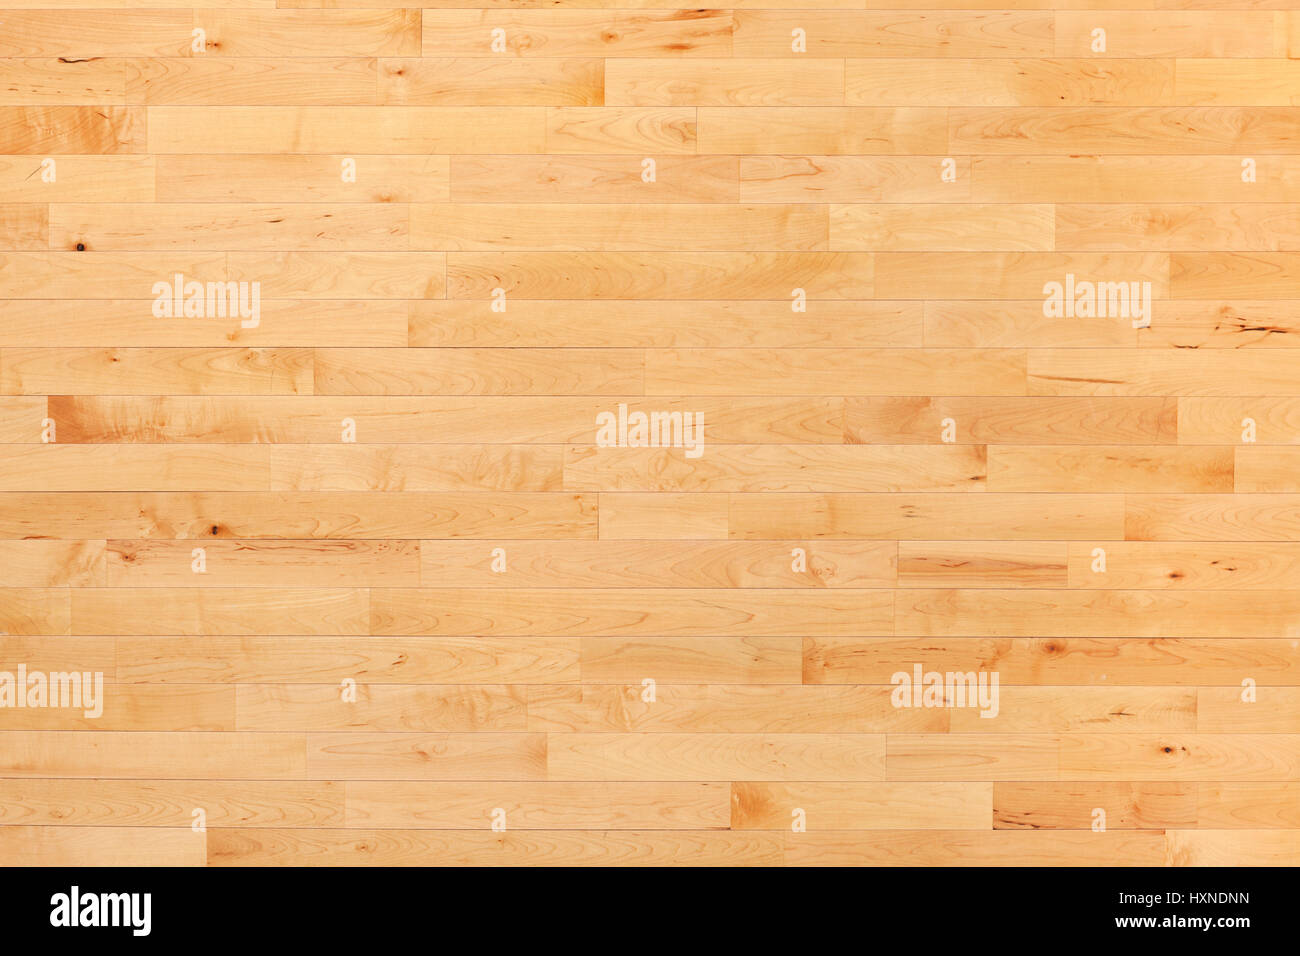 3,700+ Wood Basketball Court Stock Photos, Pictures & Royalty-Free